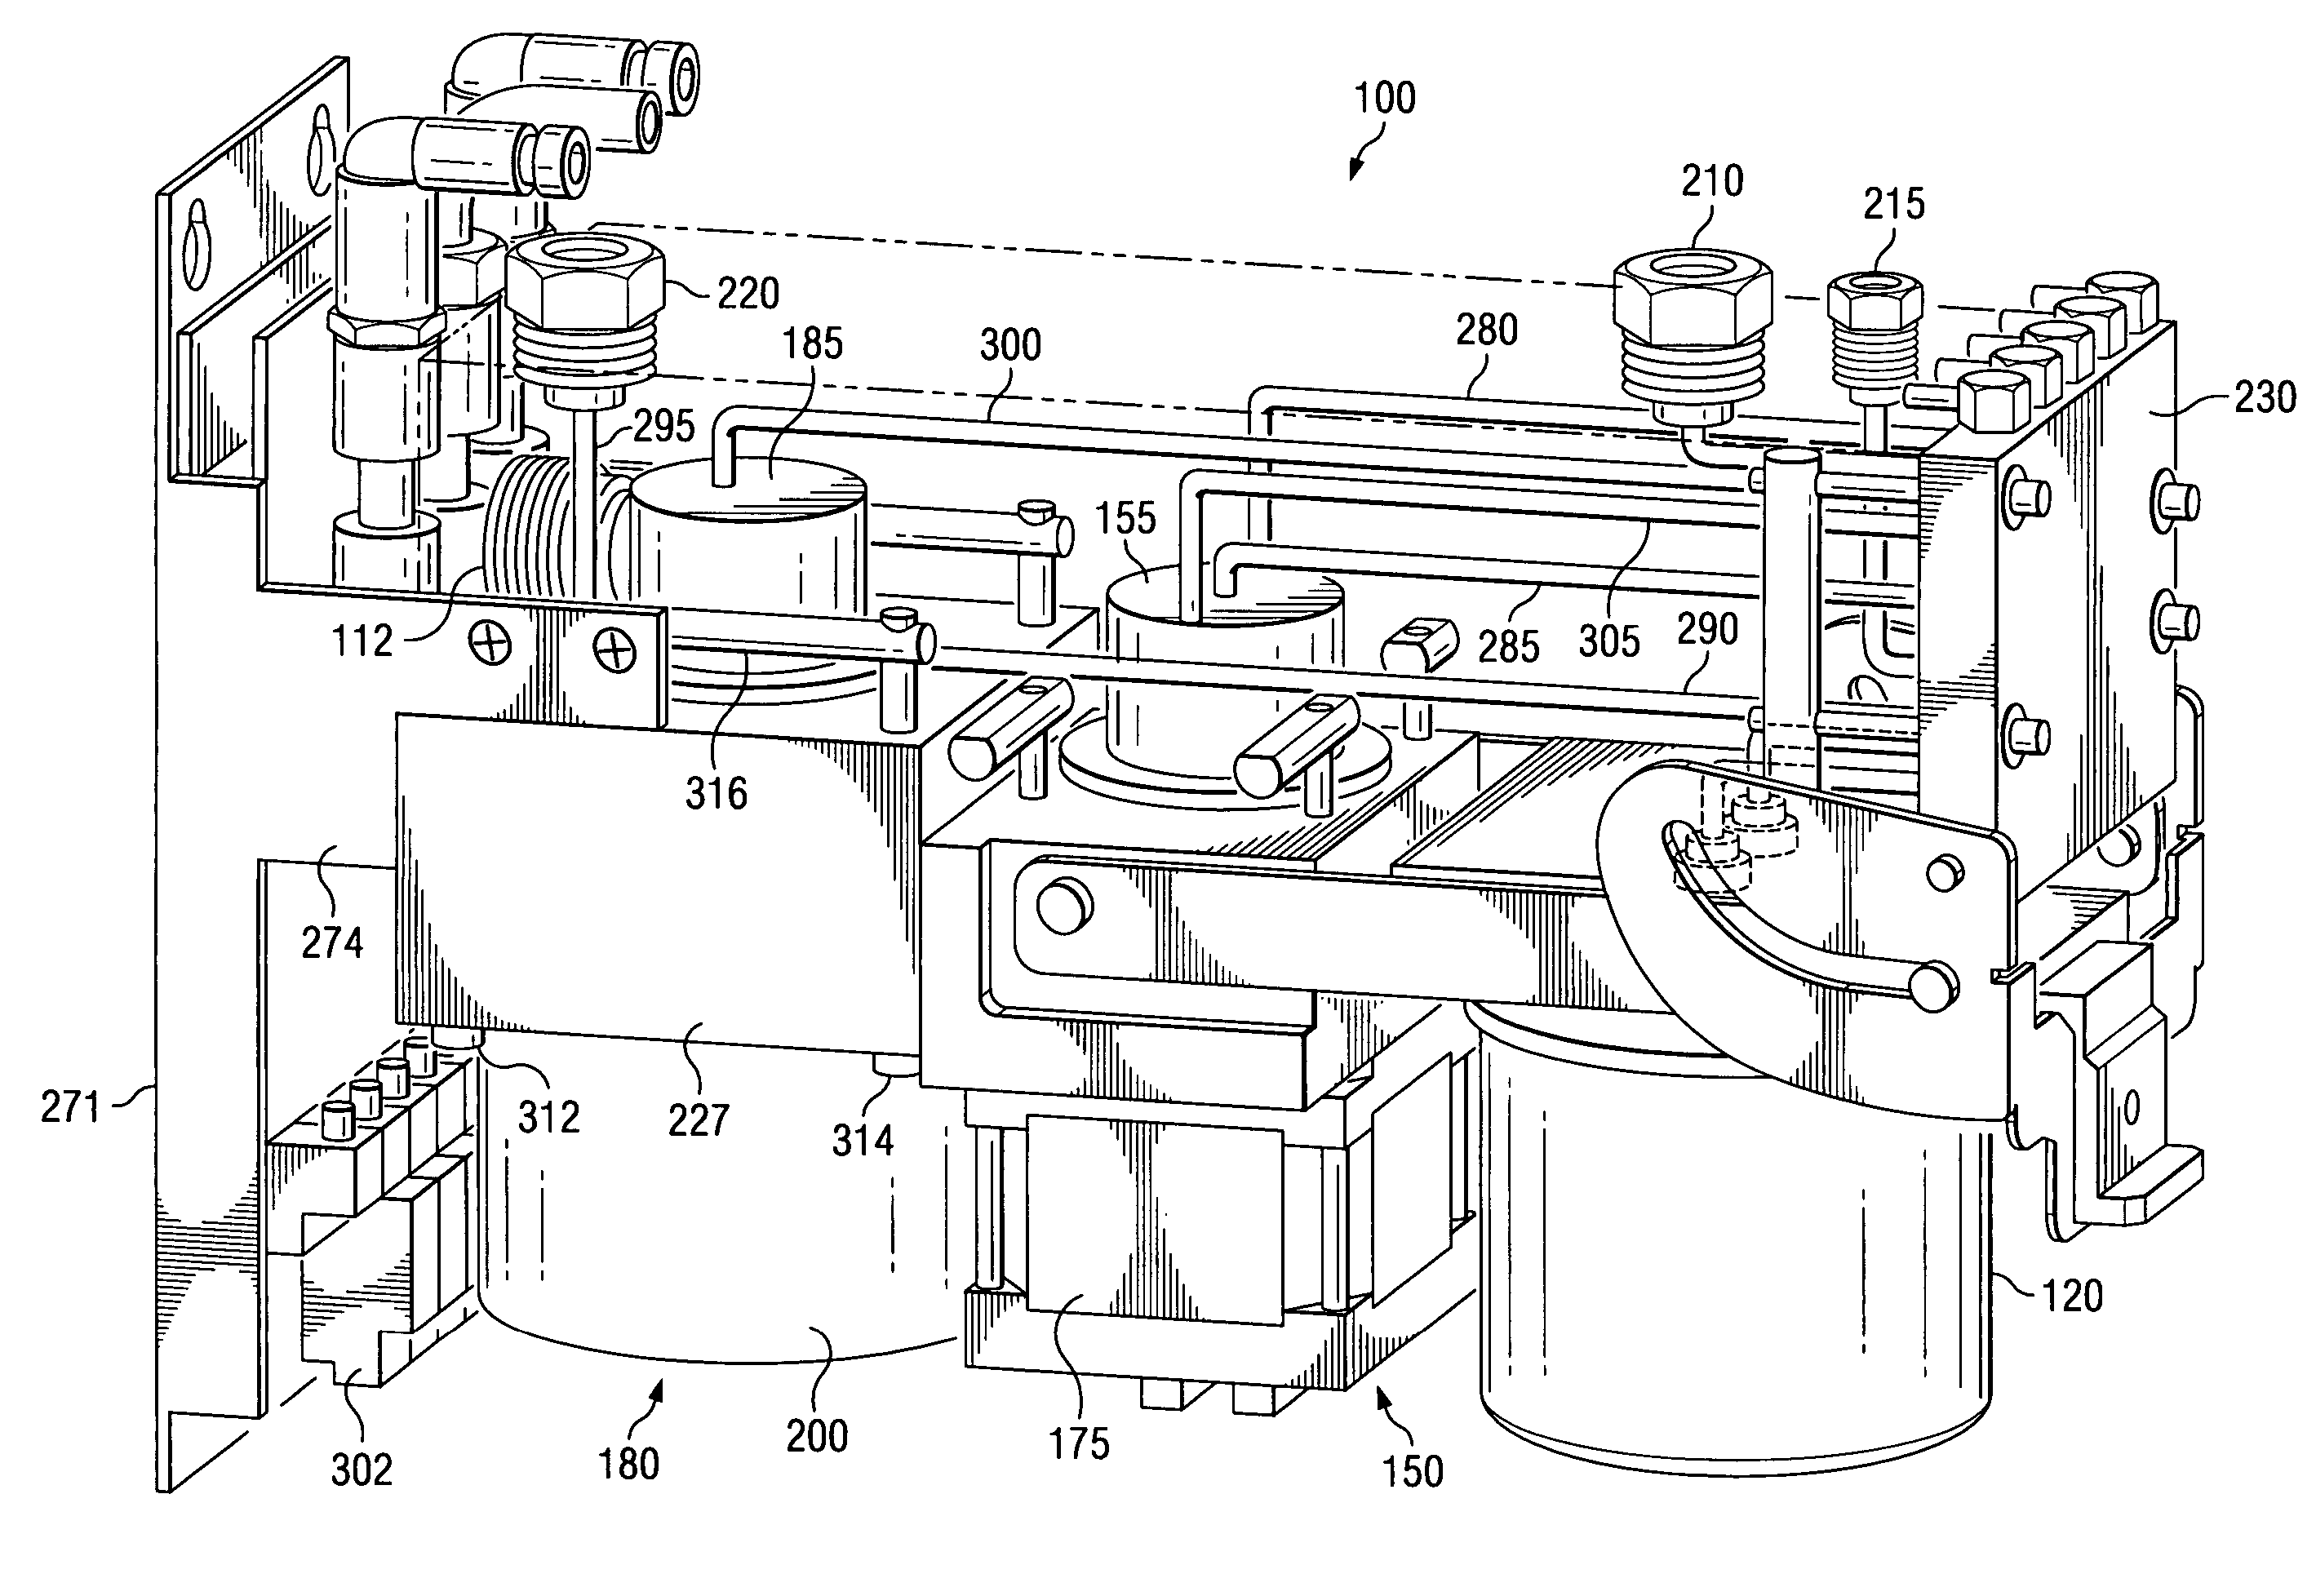 System and method for a pump with reduced form factor